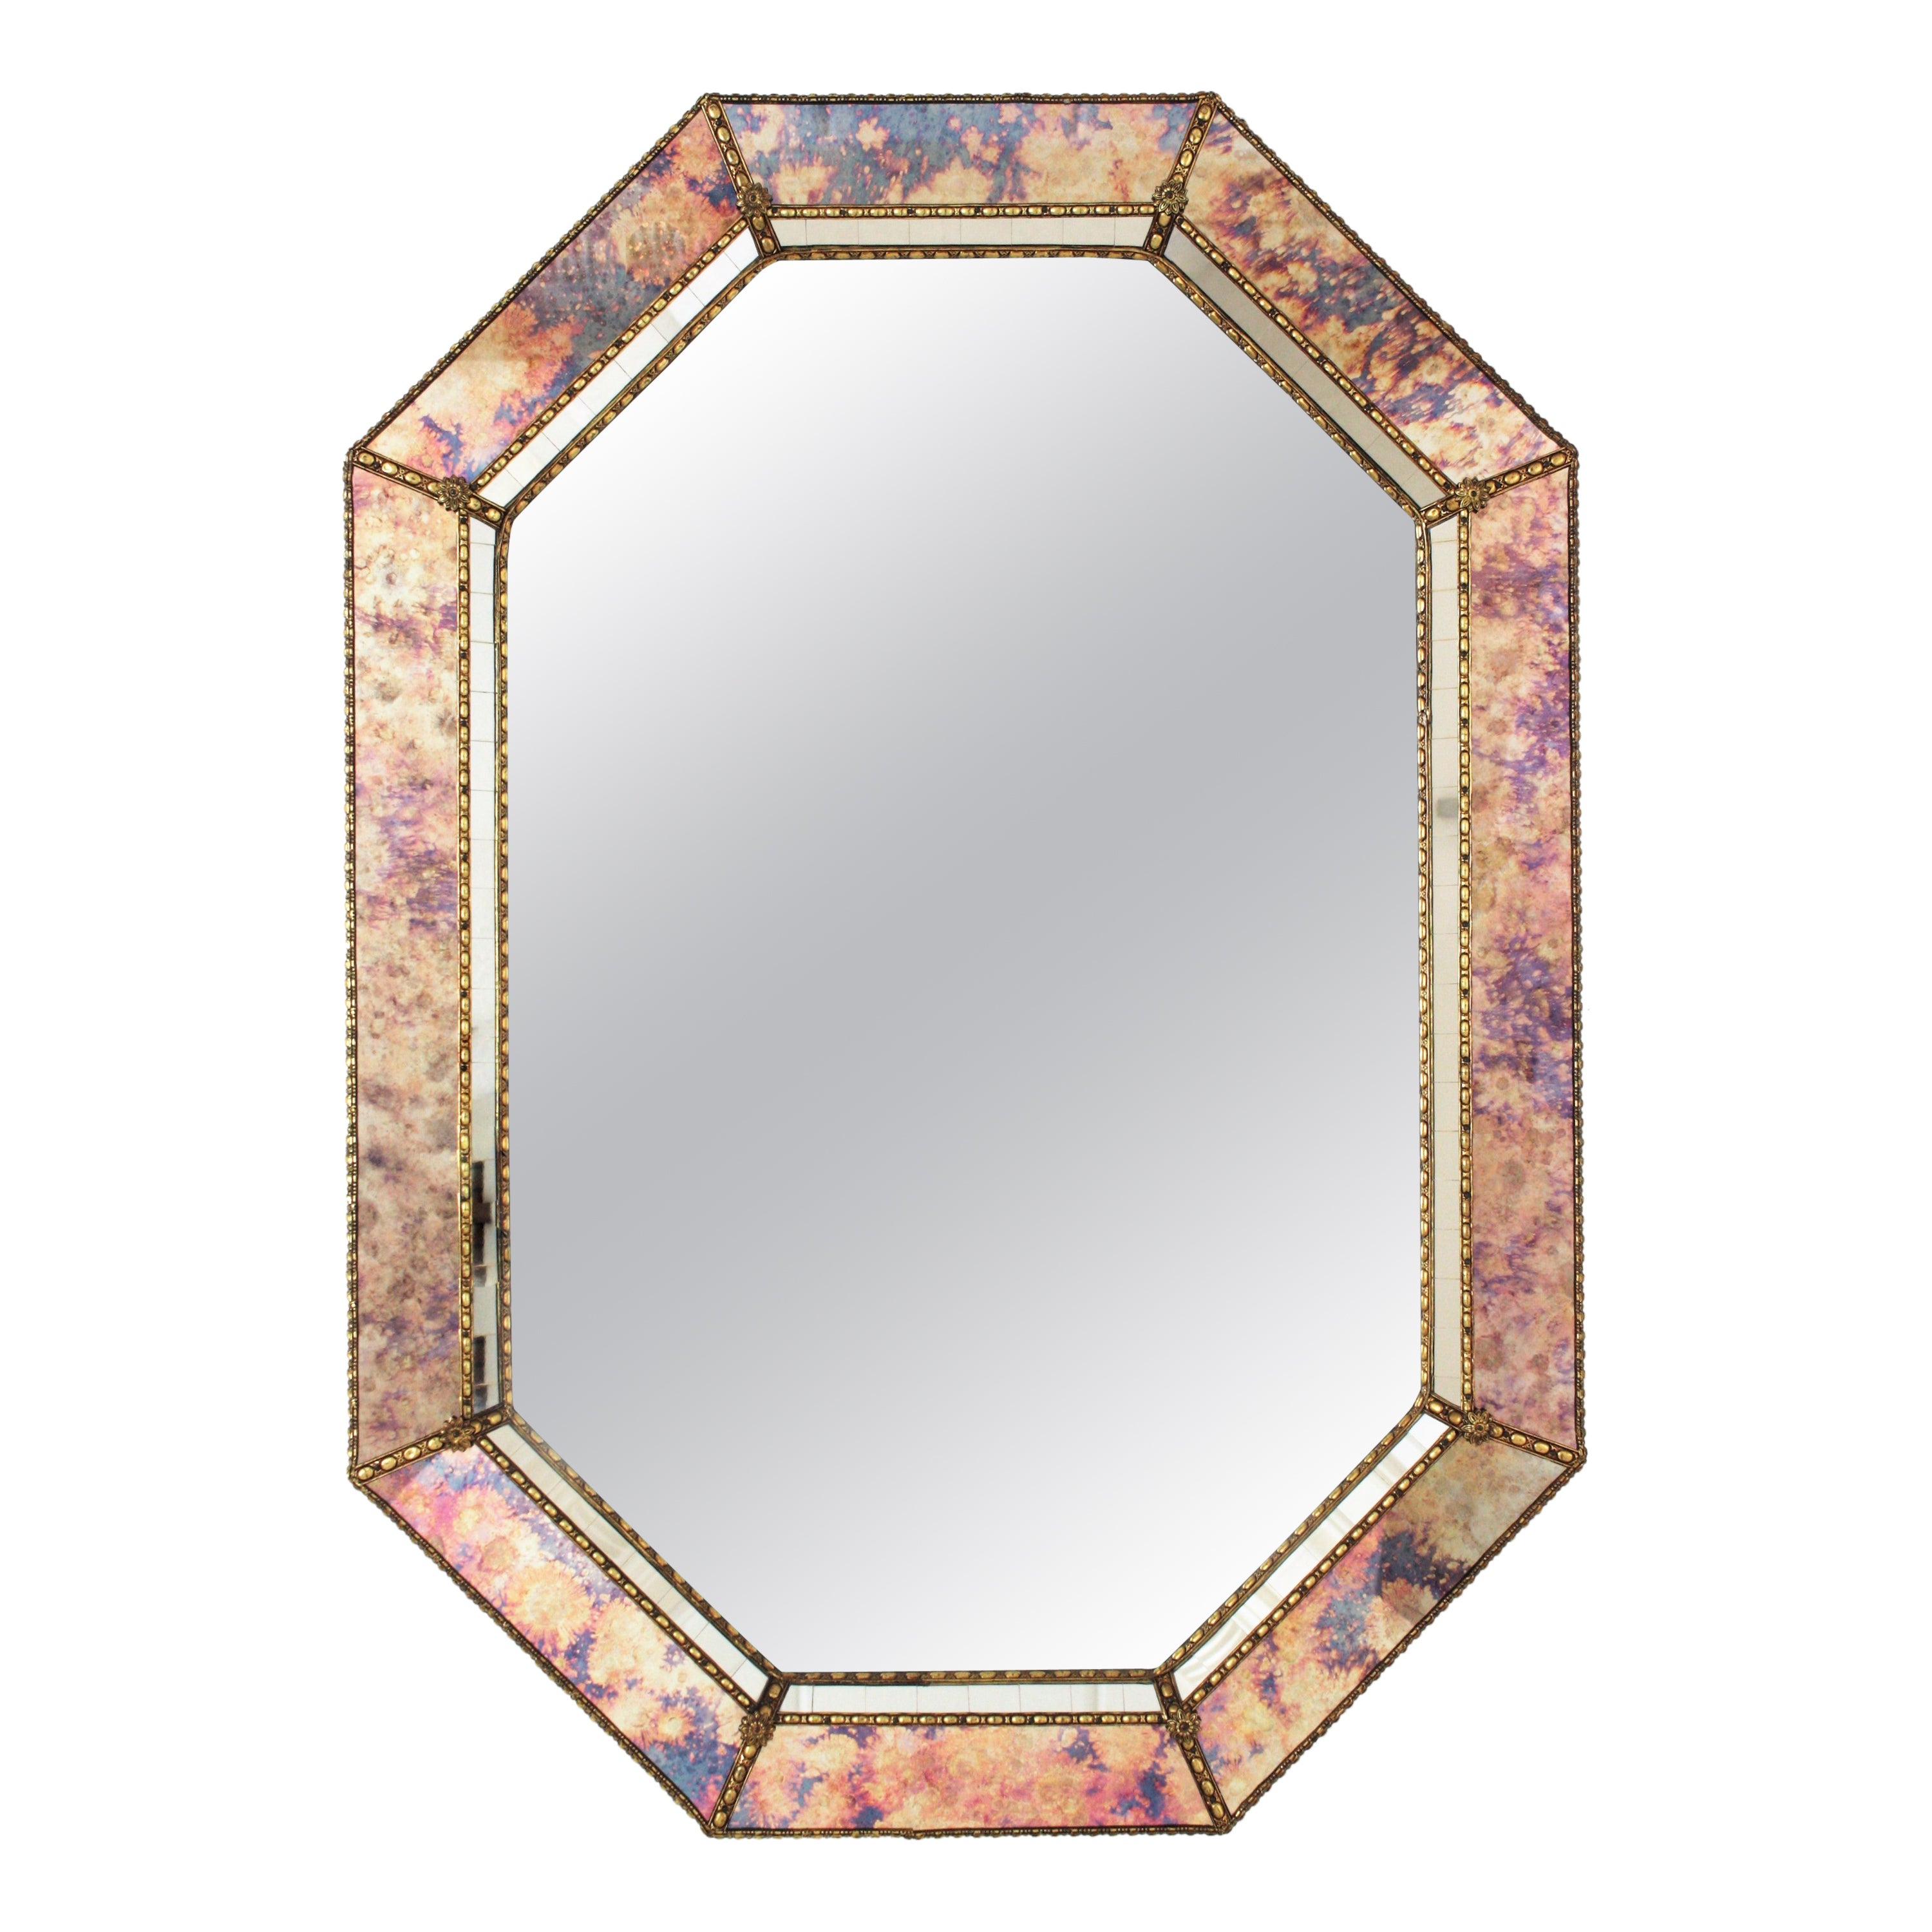 Octagonal Venetian Style Mirror with Iridiscent Glasses and Brass Details  For Sale at 1stDibs